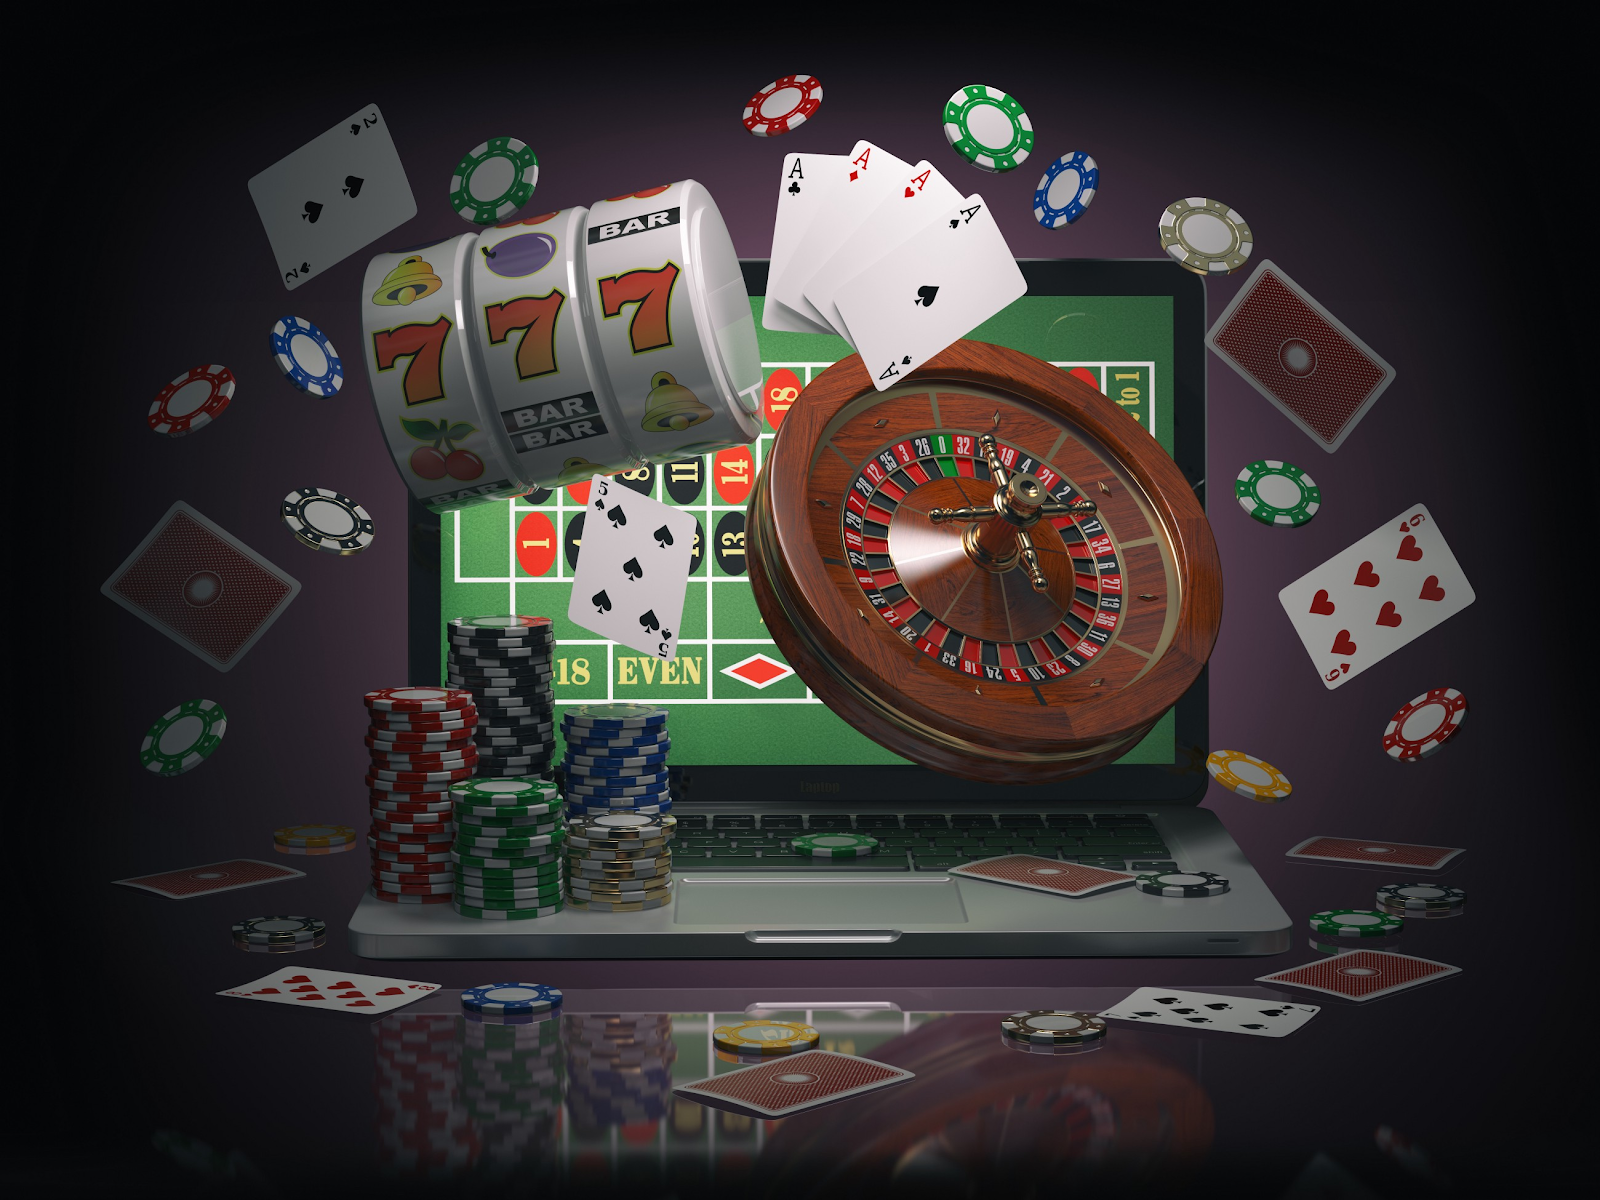 In this regard, leading internet casinos are using high-level SSL encryption to protect their player’s information. Another thing that online casinos are doing to improve security is by offering a wide range of secure payment options that players can use to deposit funds into their accounts. From American Express to MasterCard and PayPal, there is no limit as to the banking methods you can use to make a deposit or withdraw your winnings.